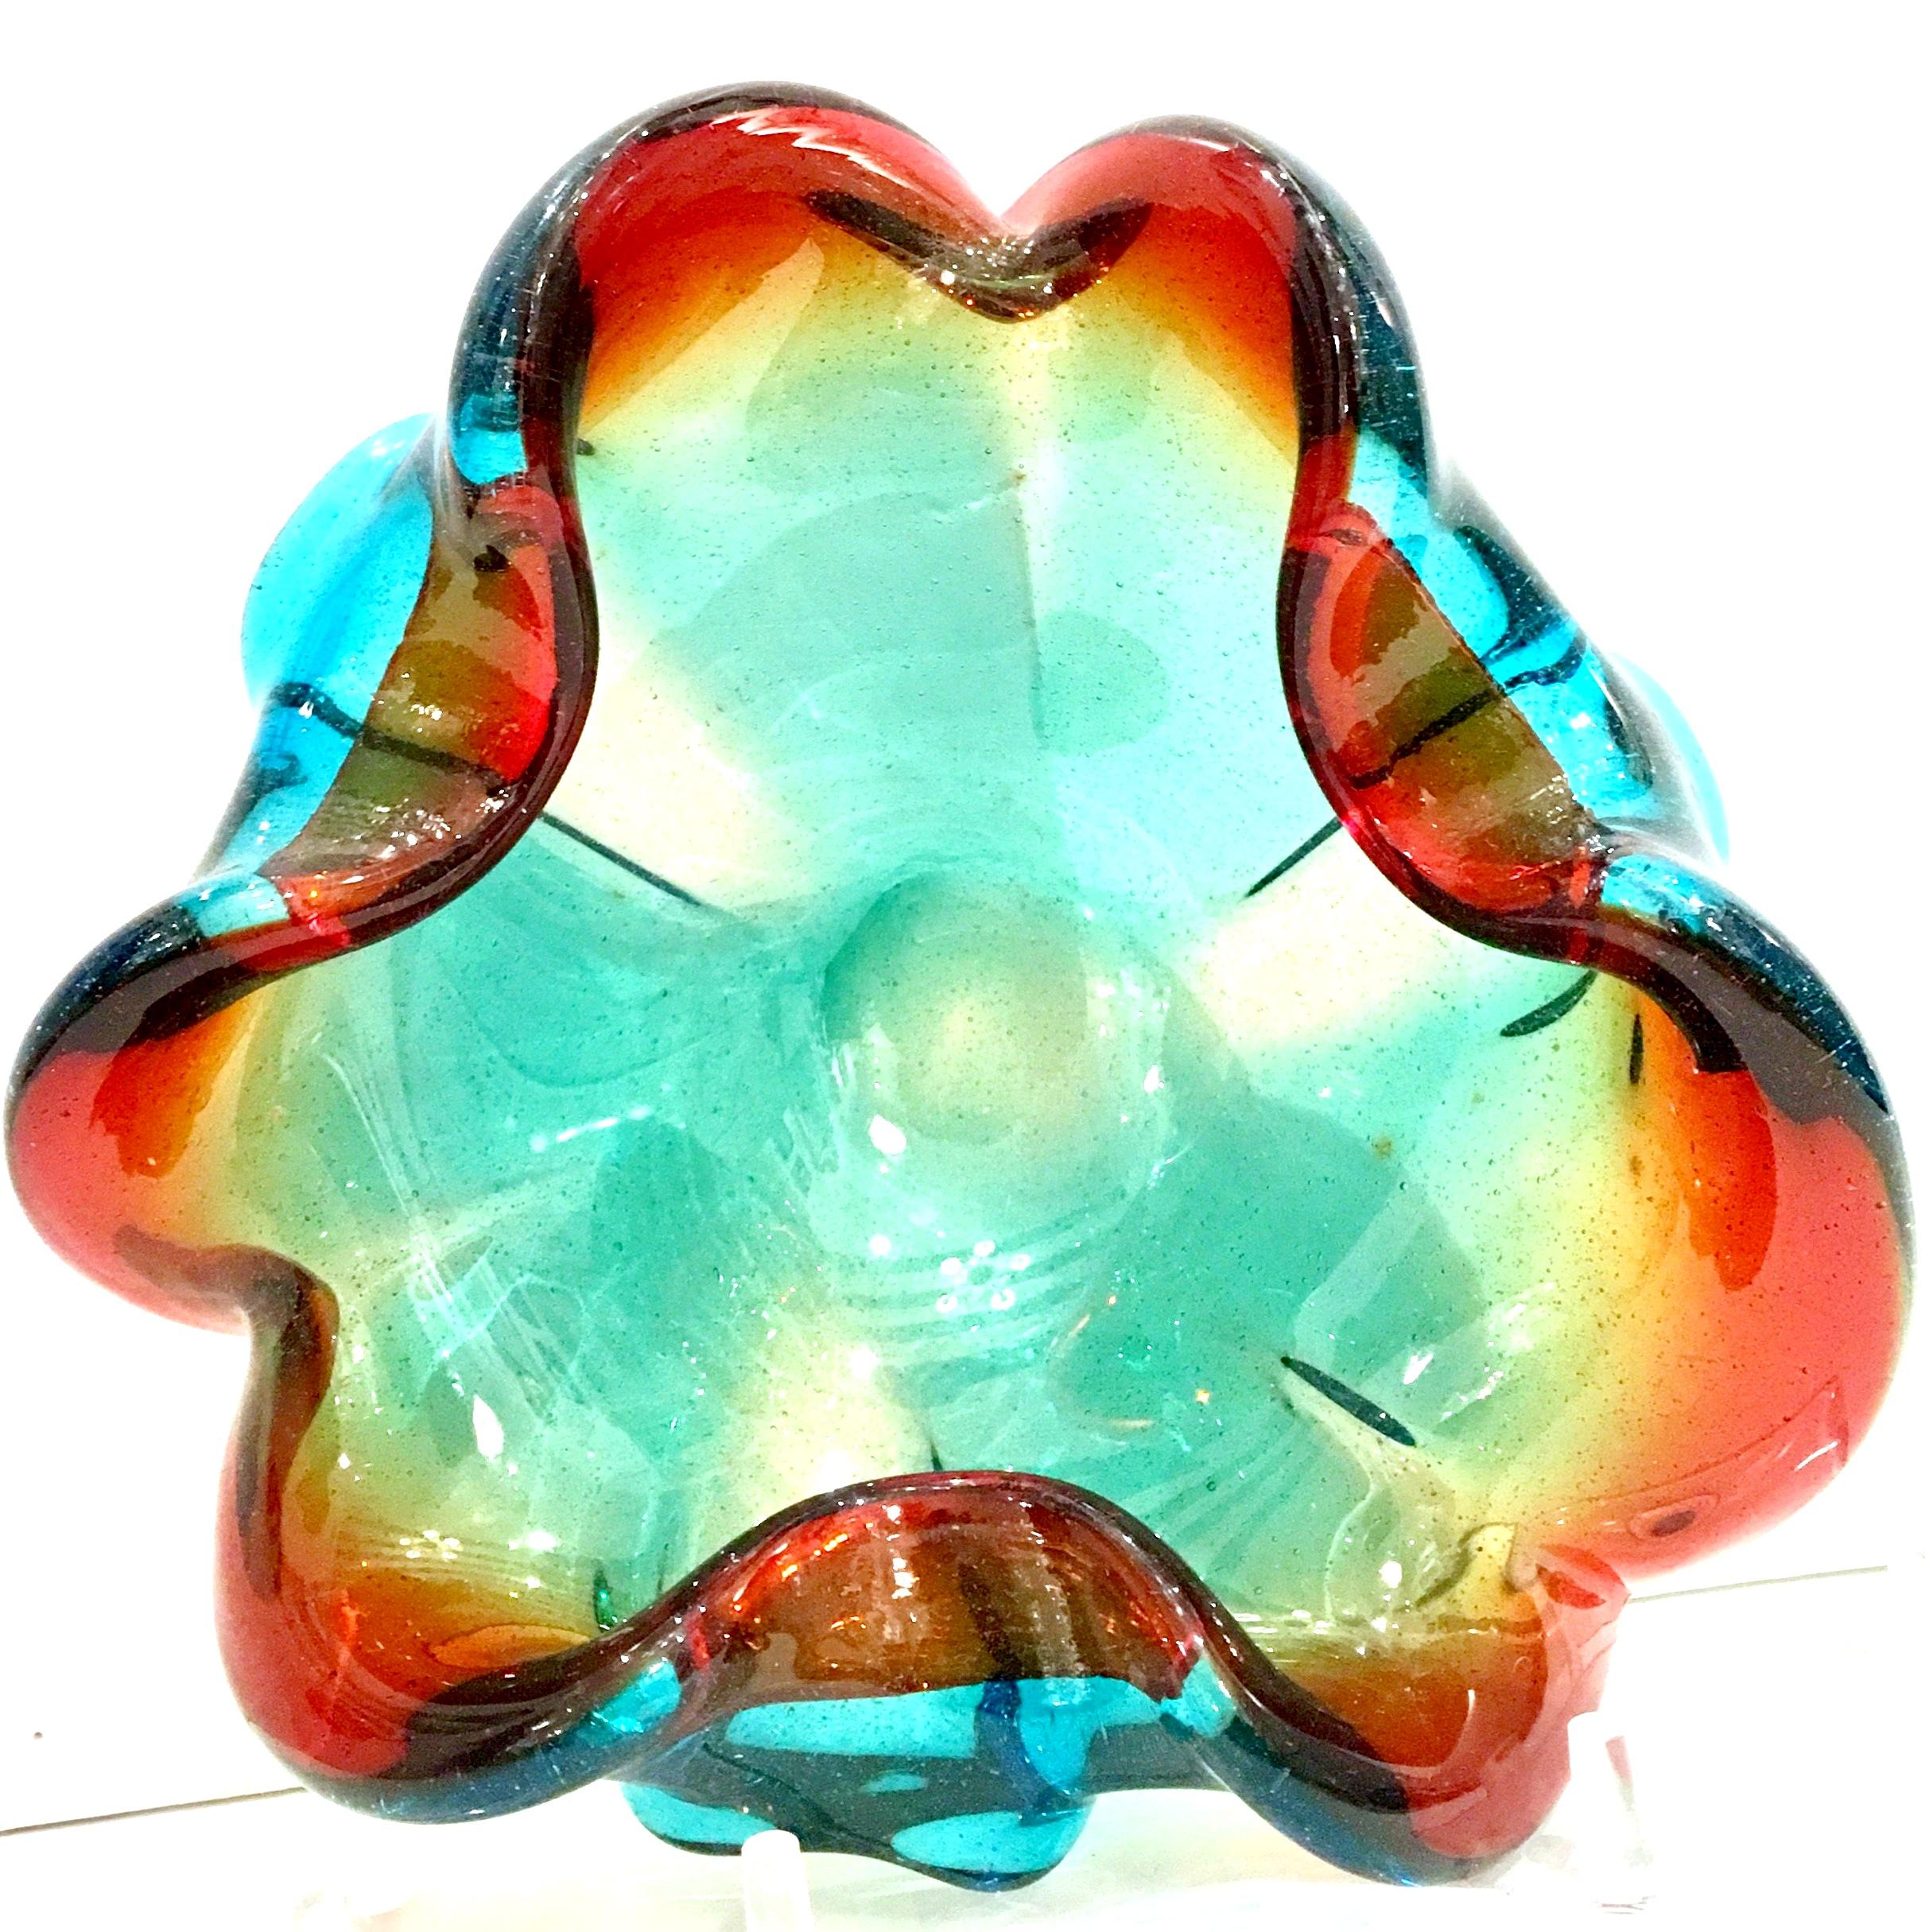 Mid-20th century Italian Murano glass tri-color large flower bowl. Features inclusion bubble detail with a vibrant turquoise to amber 